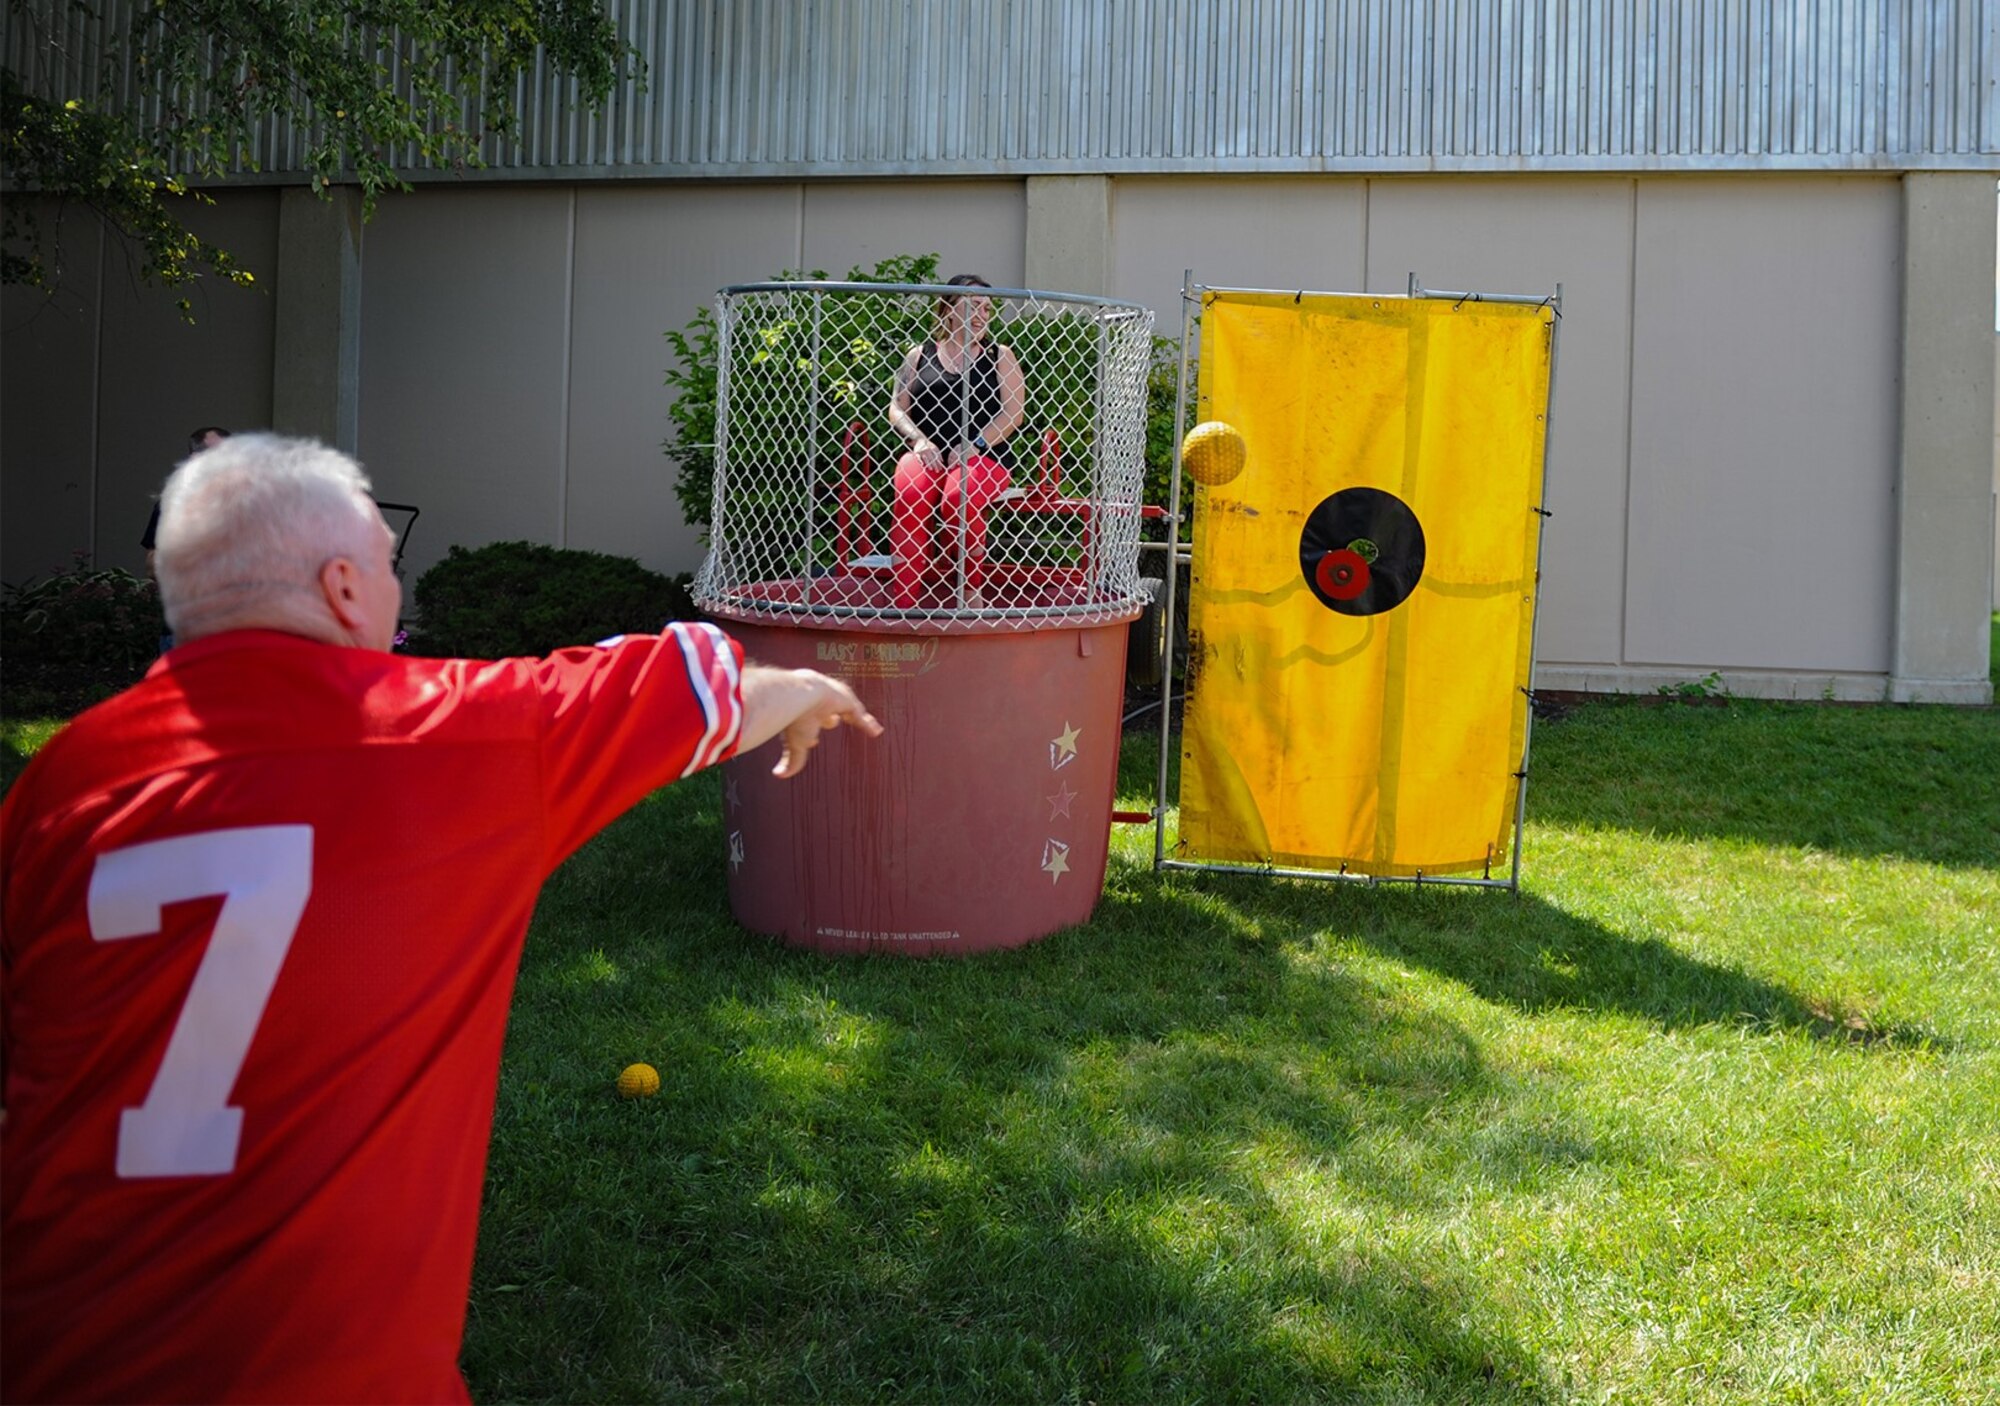 Rob Young, National Air and Space Intelligence Center throws a ball aimed directly at the target of the dunk tank during the National Air and Space Intelligence Center block party at Wright-Patterson AFB, Ohio, Sept. 8, 2022. The dunk tank served as a fundraiser to raise proceeds for the NASIC Ball.